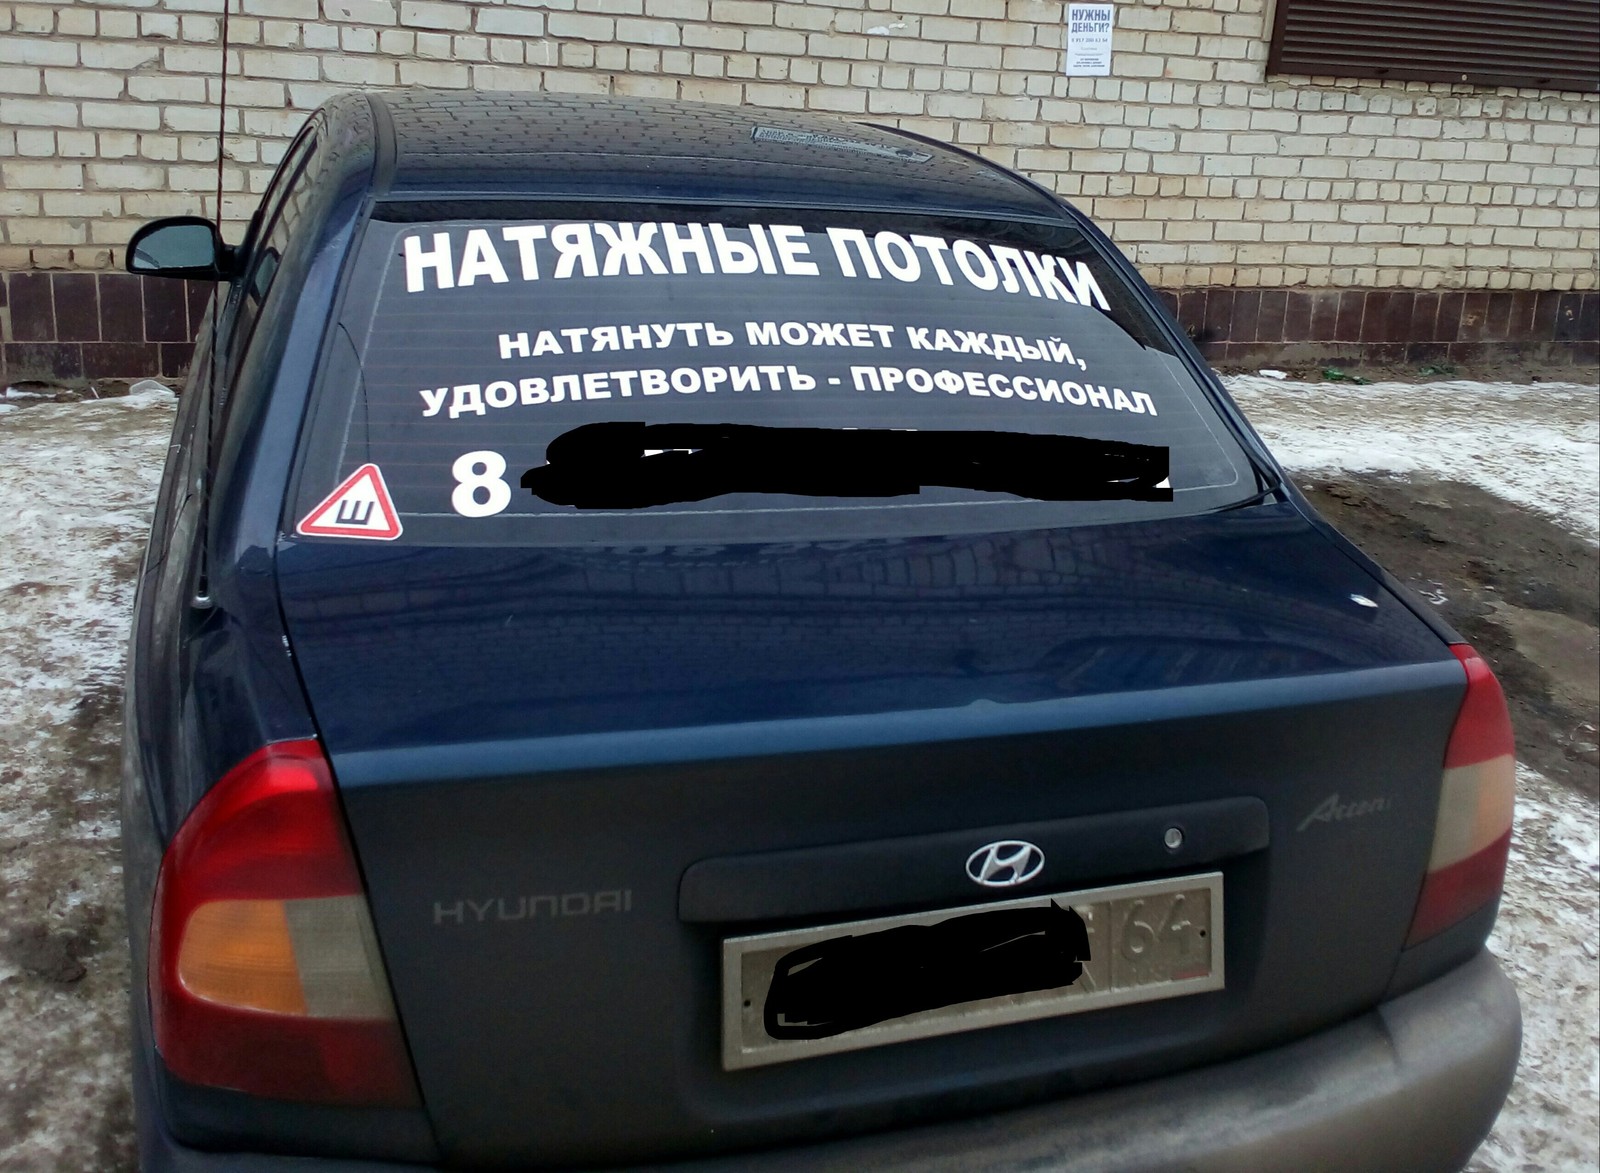 Advertising))) - Professional, Stretch ceiling